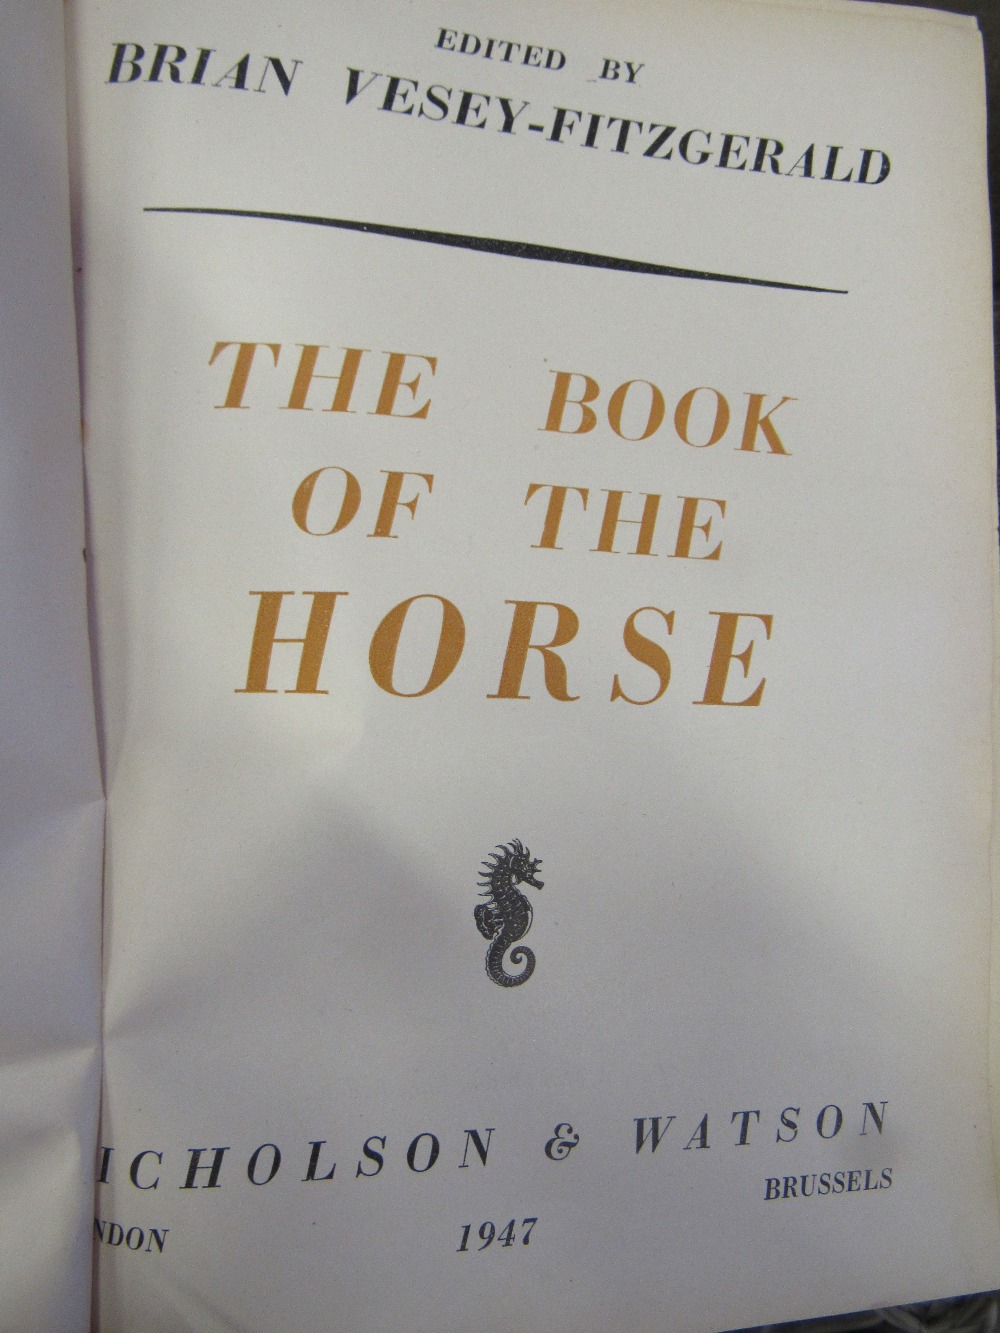 Vesey-Fitzgerald, Brian (Ed.): The Book of the Horse; 1947. Well illustrated and with many - Image 2 of 2